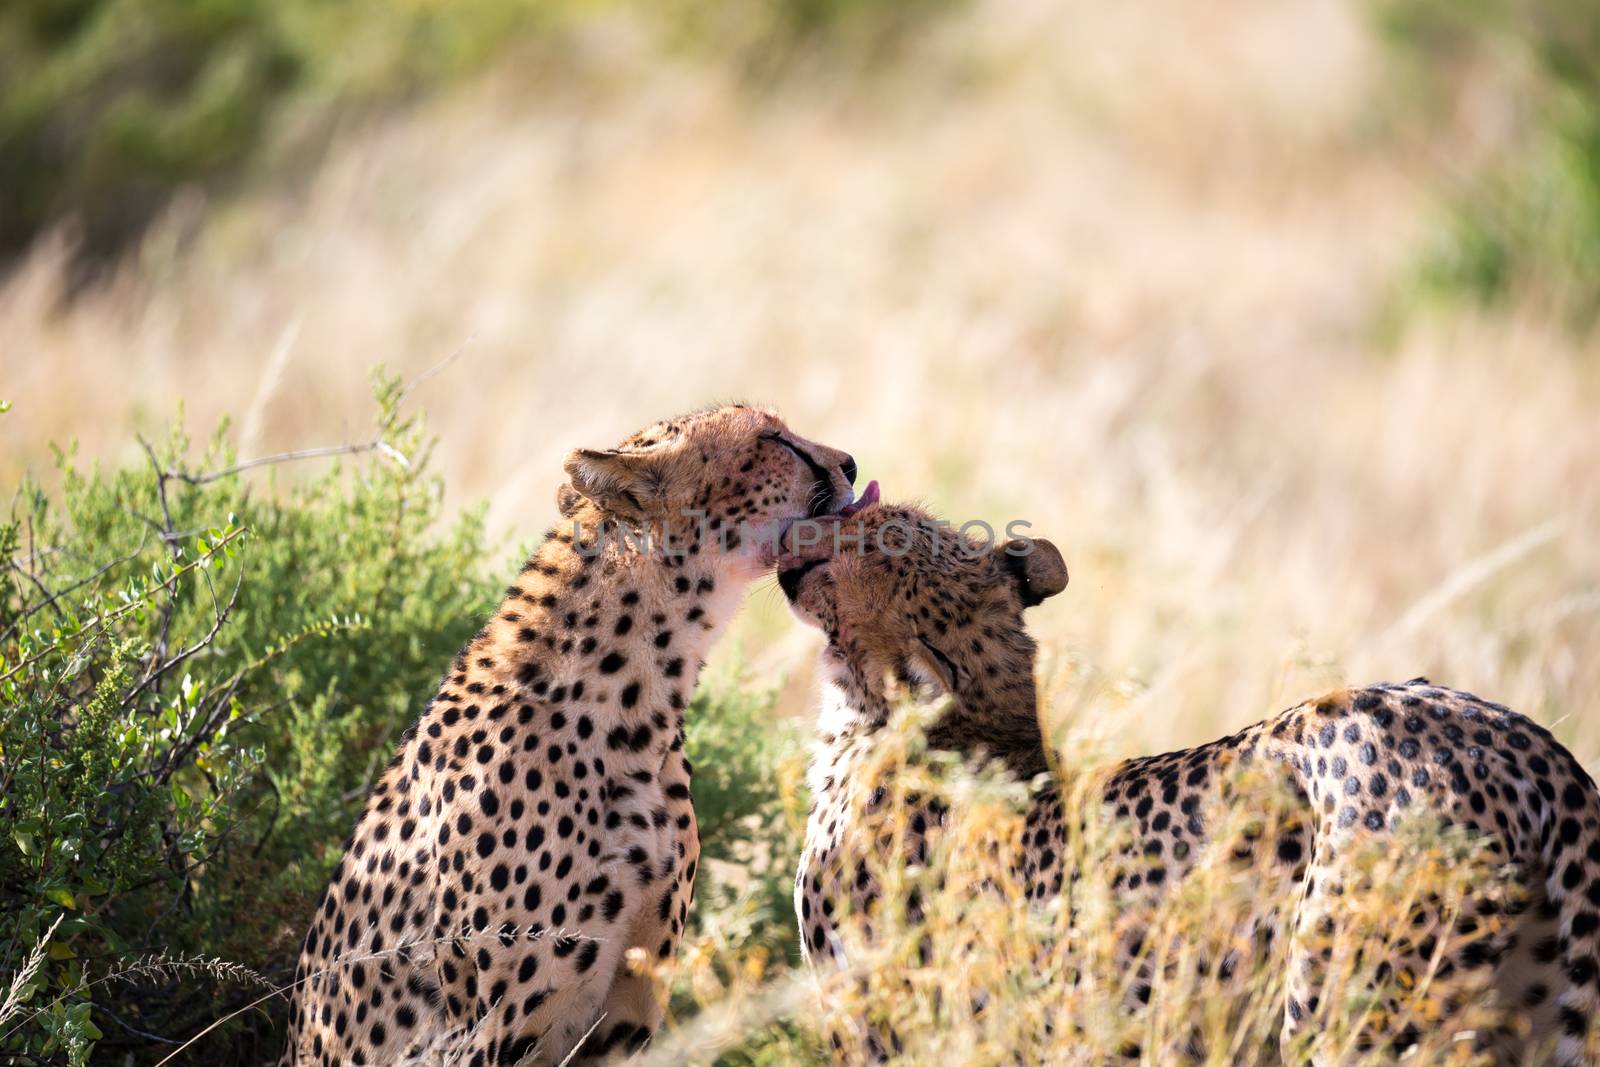 Two cheetahs brush each other after the meal by 25ehaag6